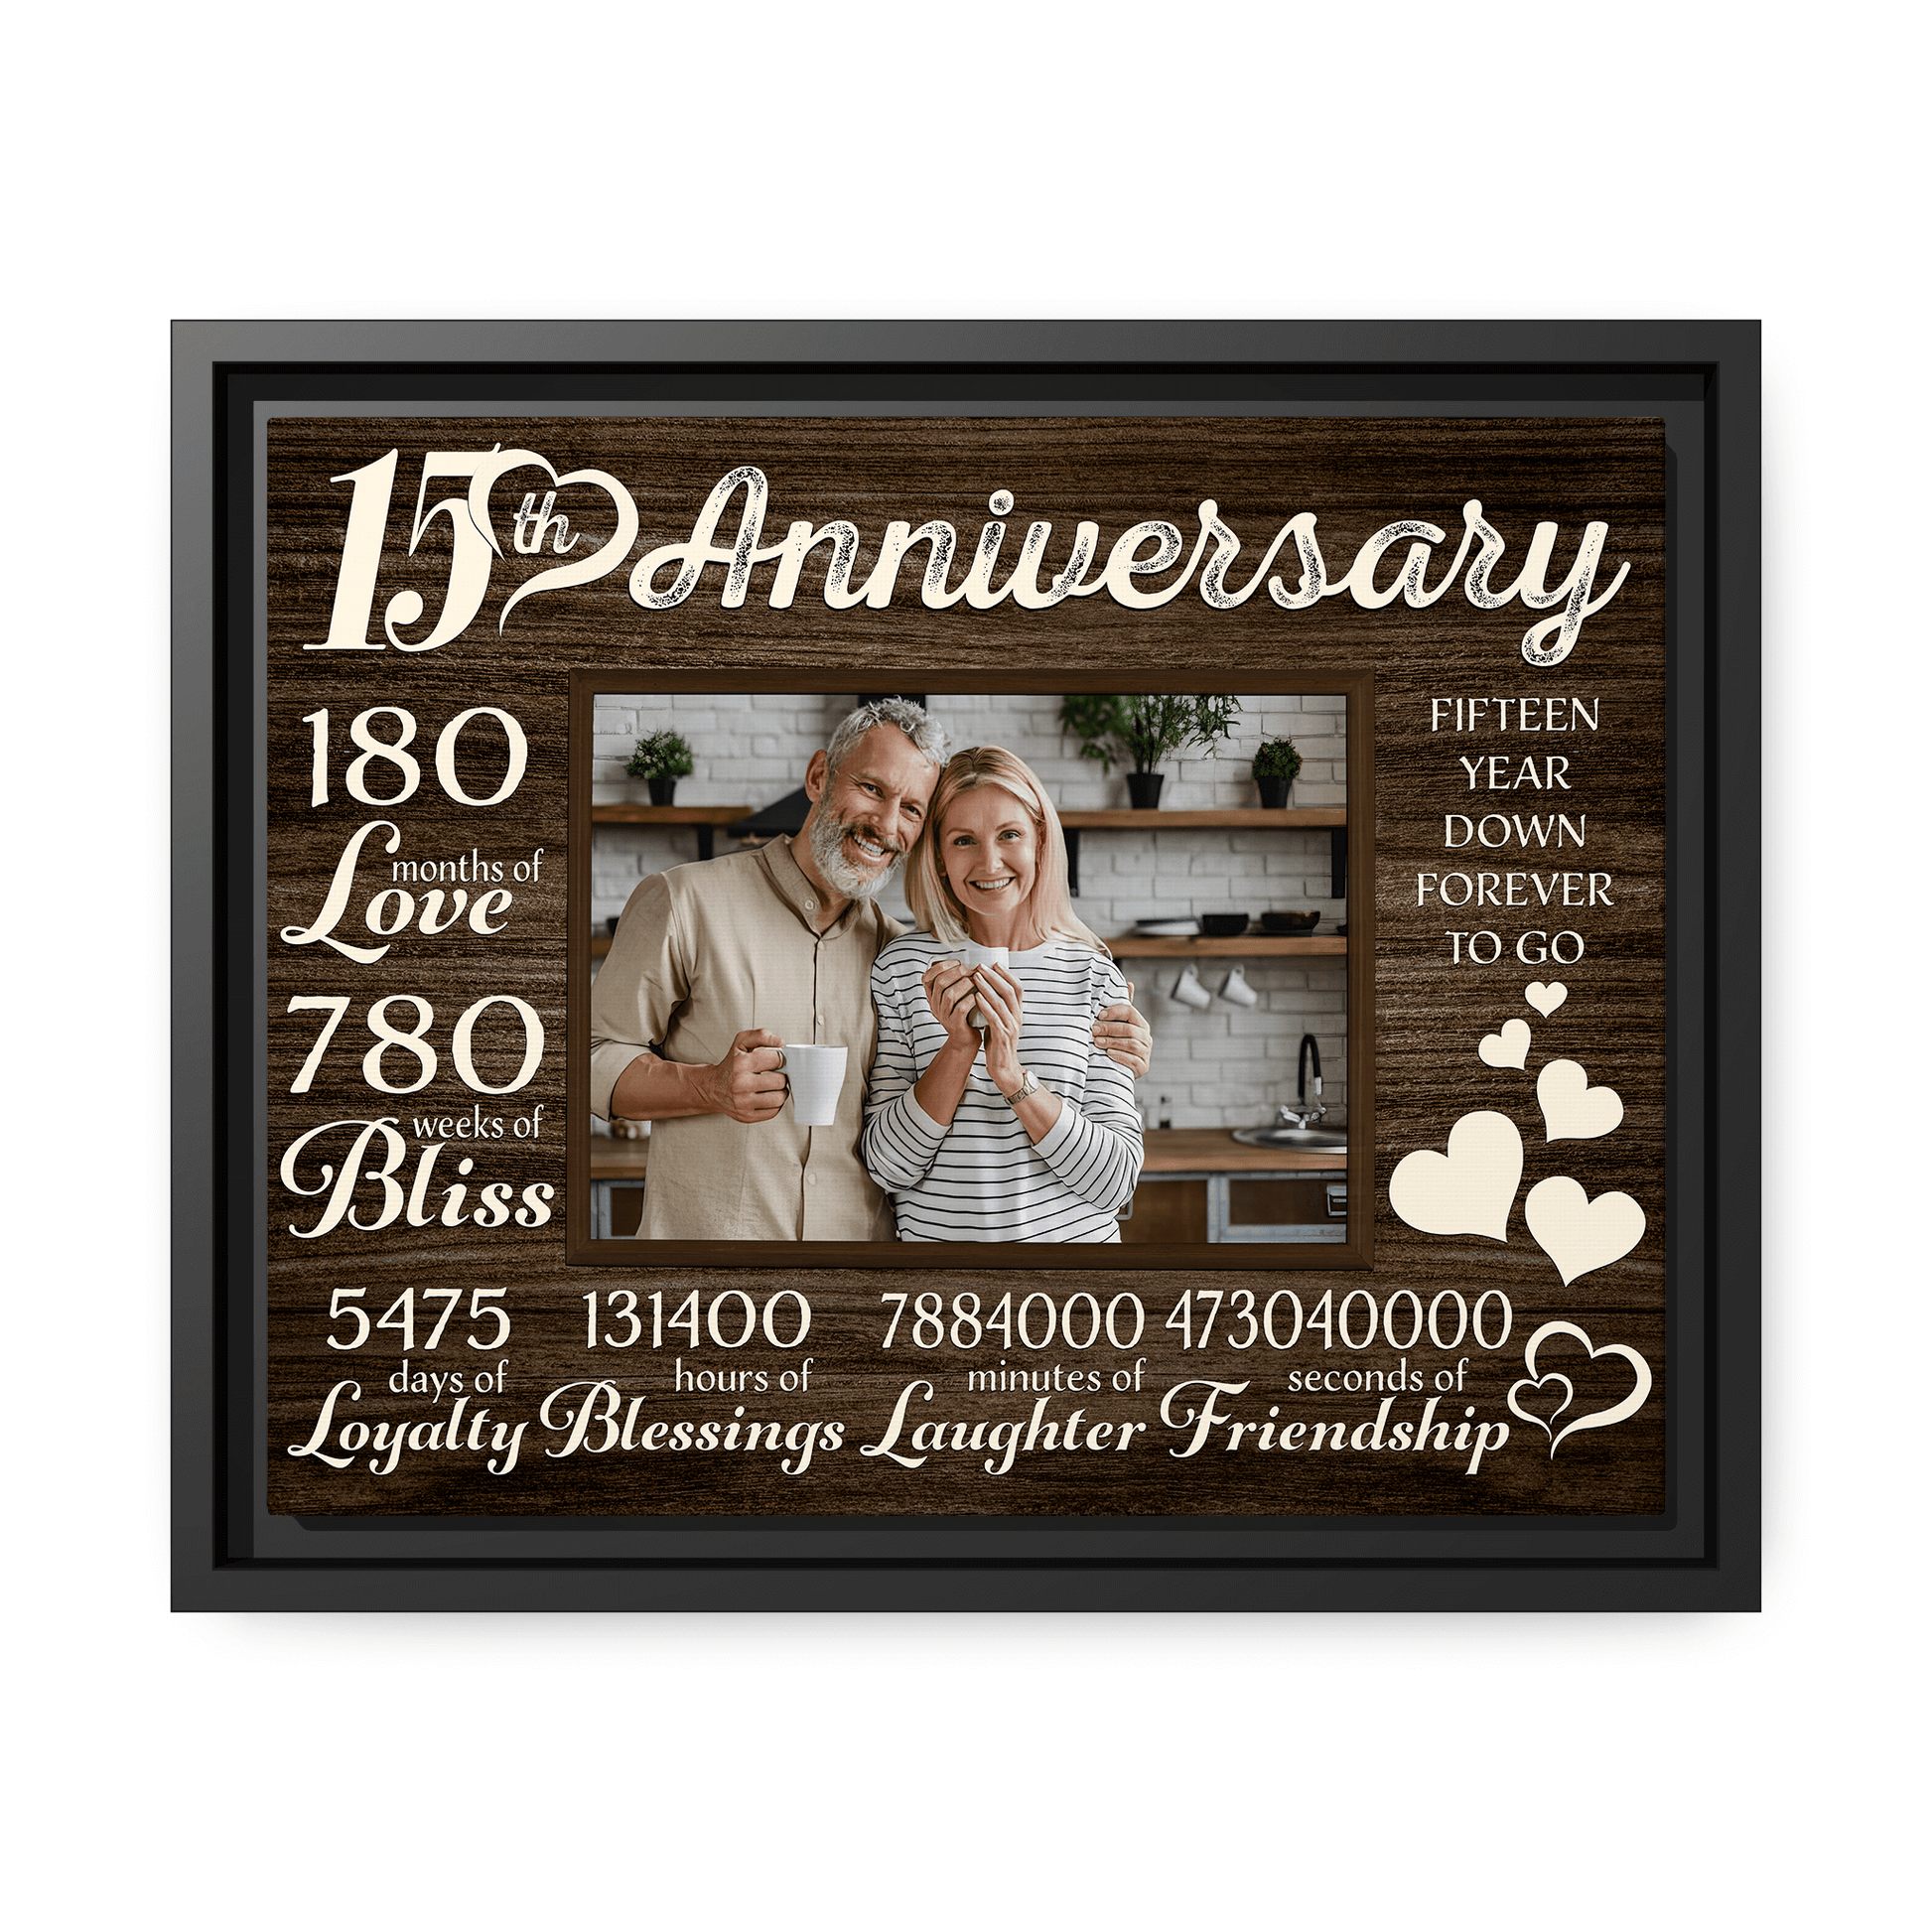 6 Month Anniversary Gifts for Boyfriend - Engraved / One sided - 8x12